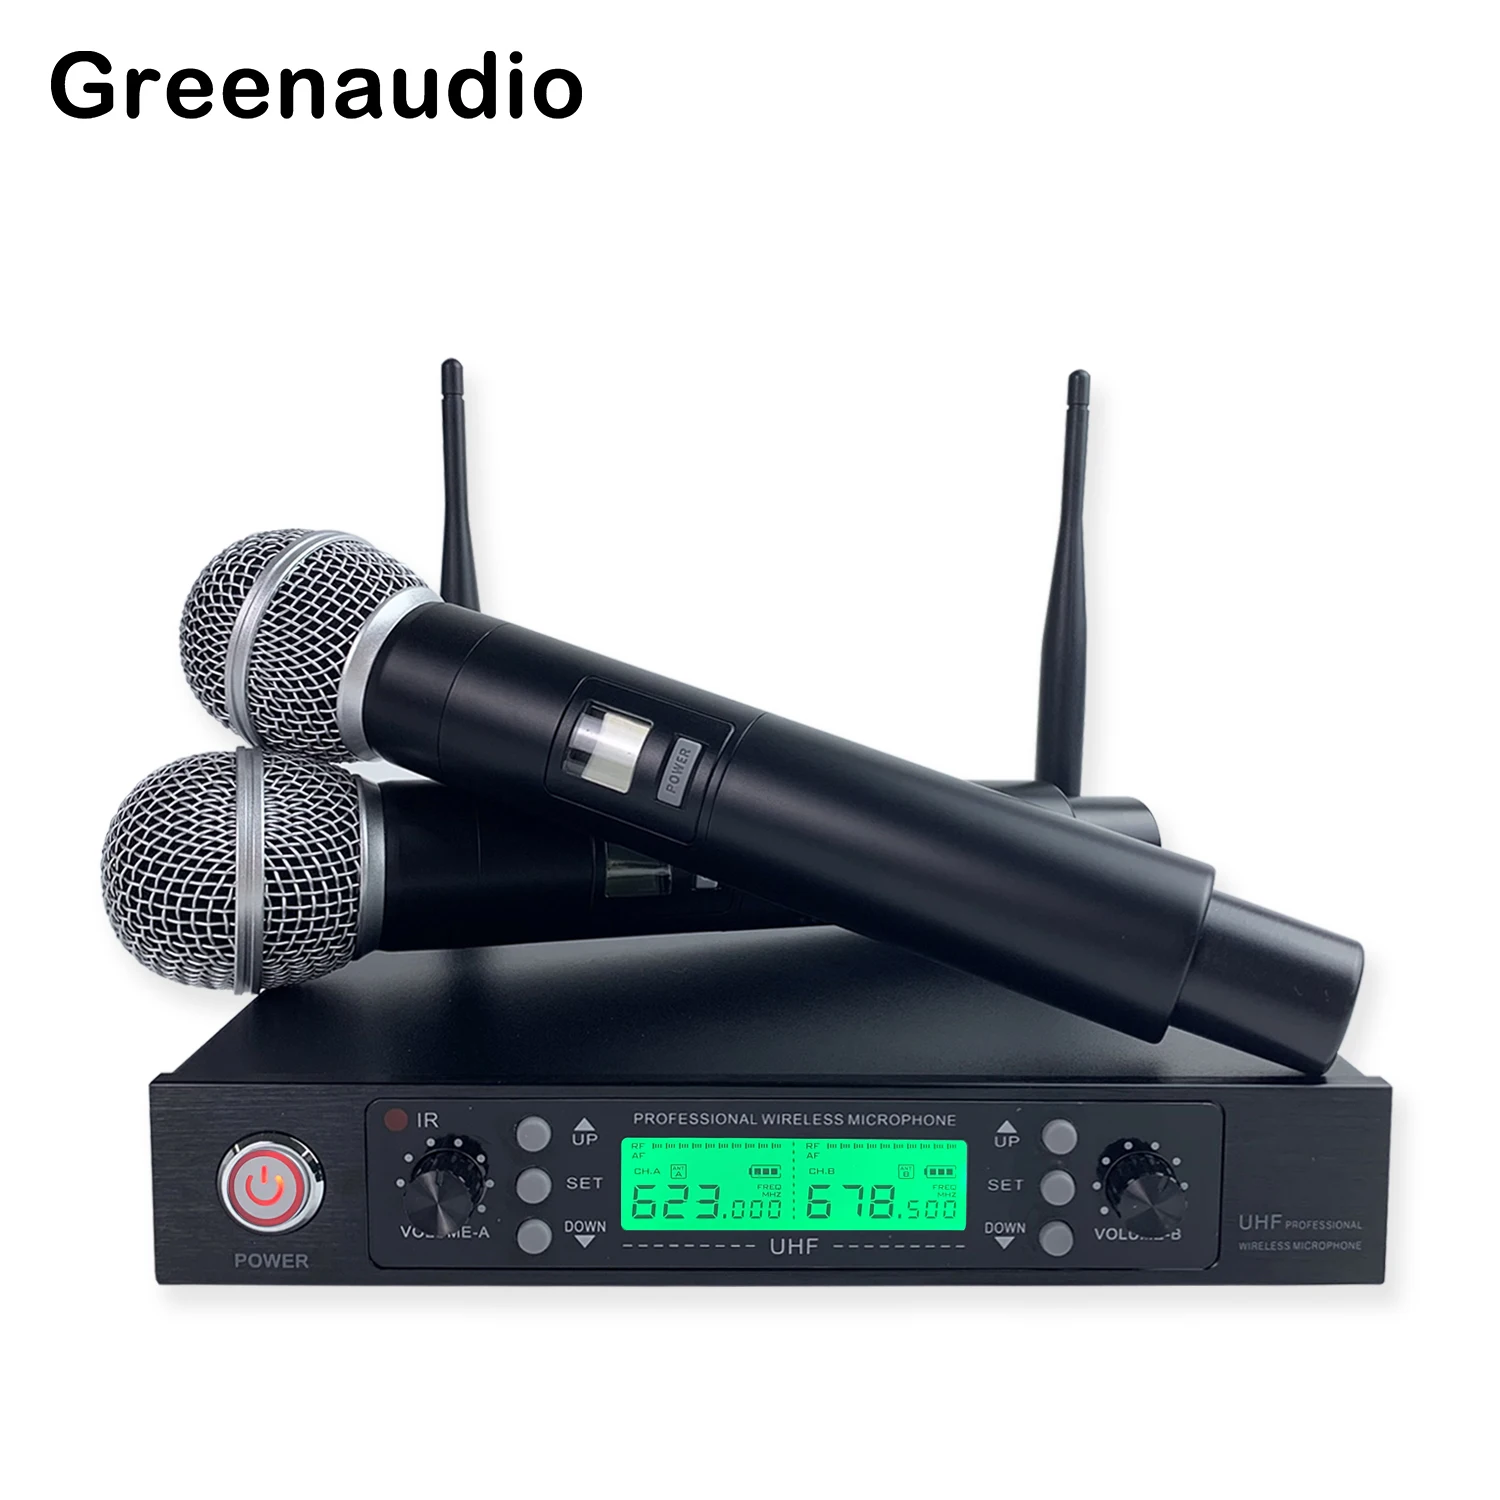 

GAW-U2288 UHF One On Two Professional Household Singing Handheld Conference Performance Microphone